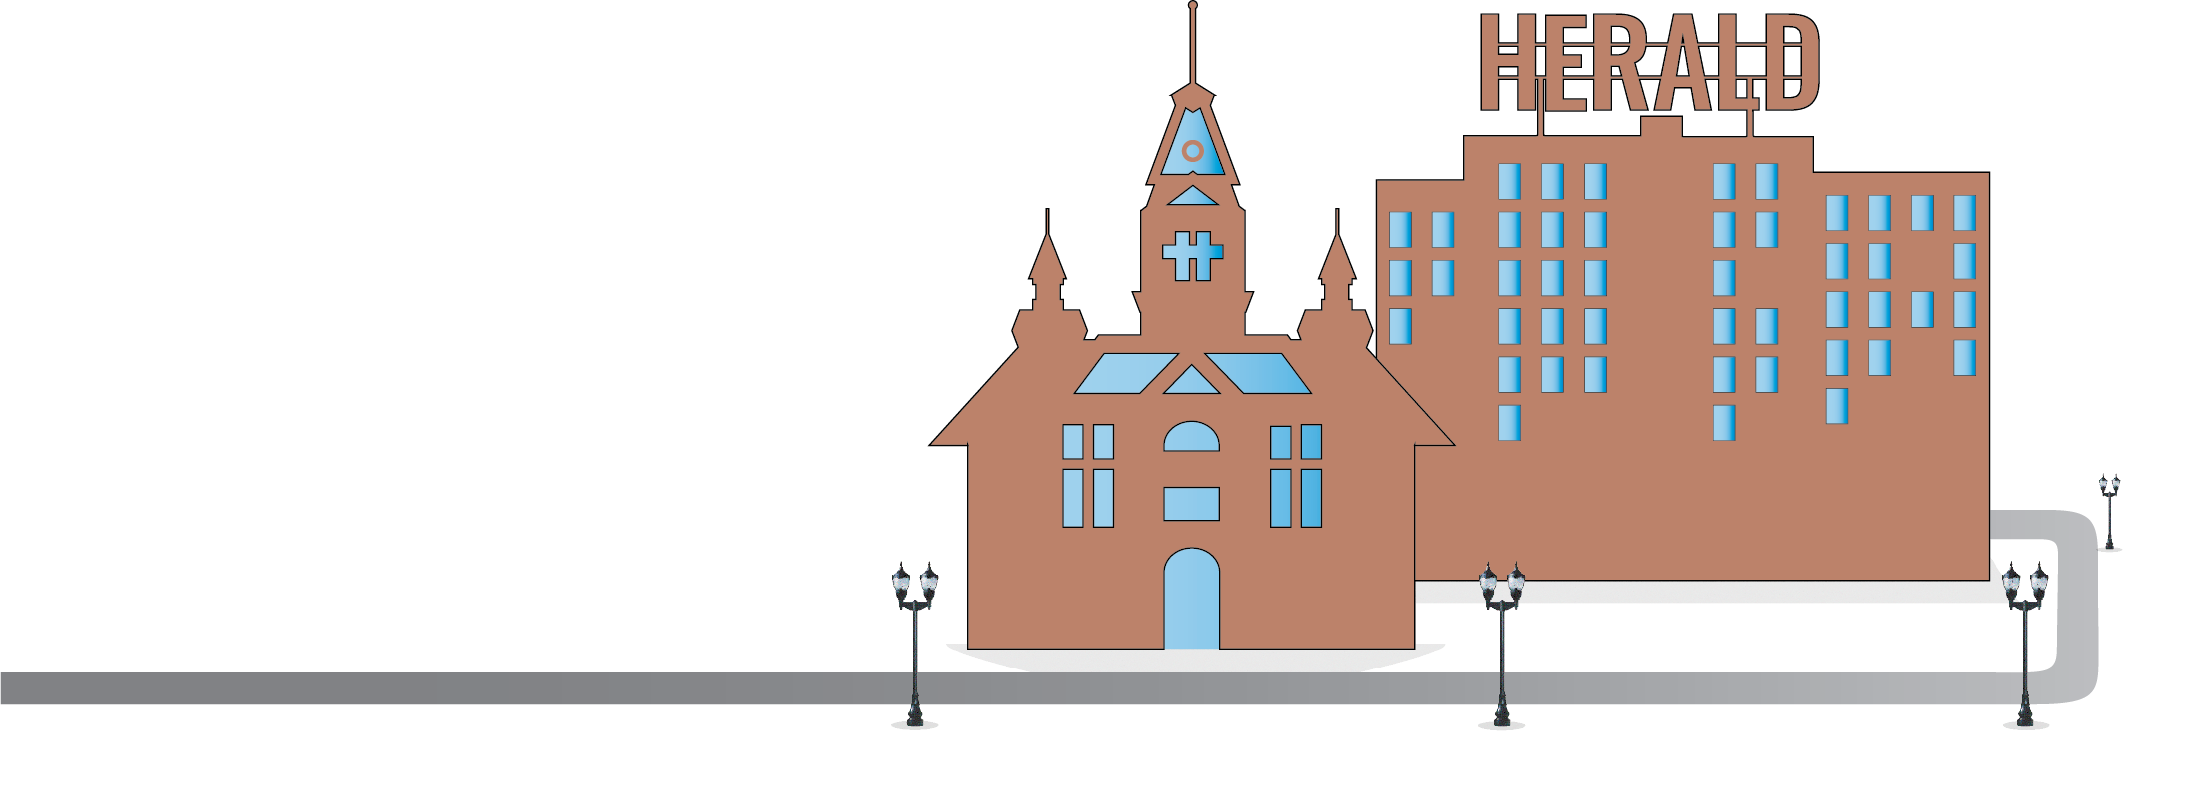 A church and the Herald building on a road with cars driving in 